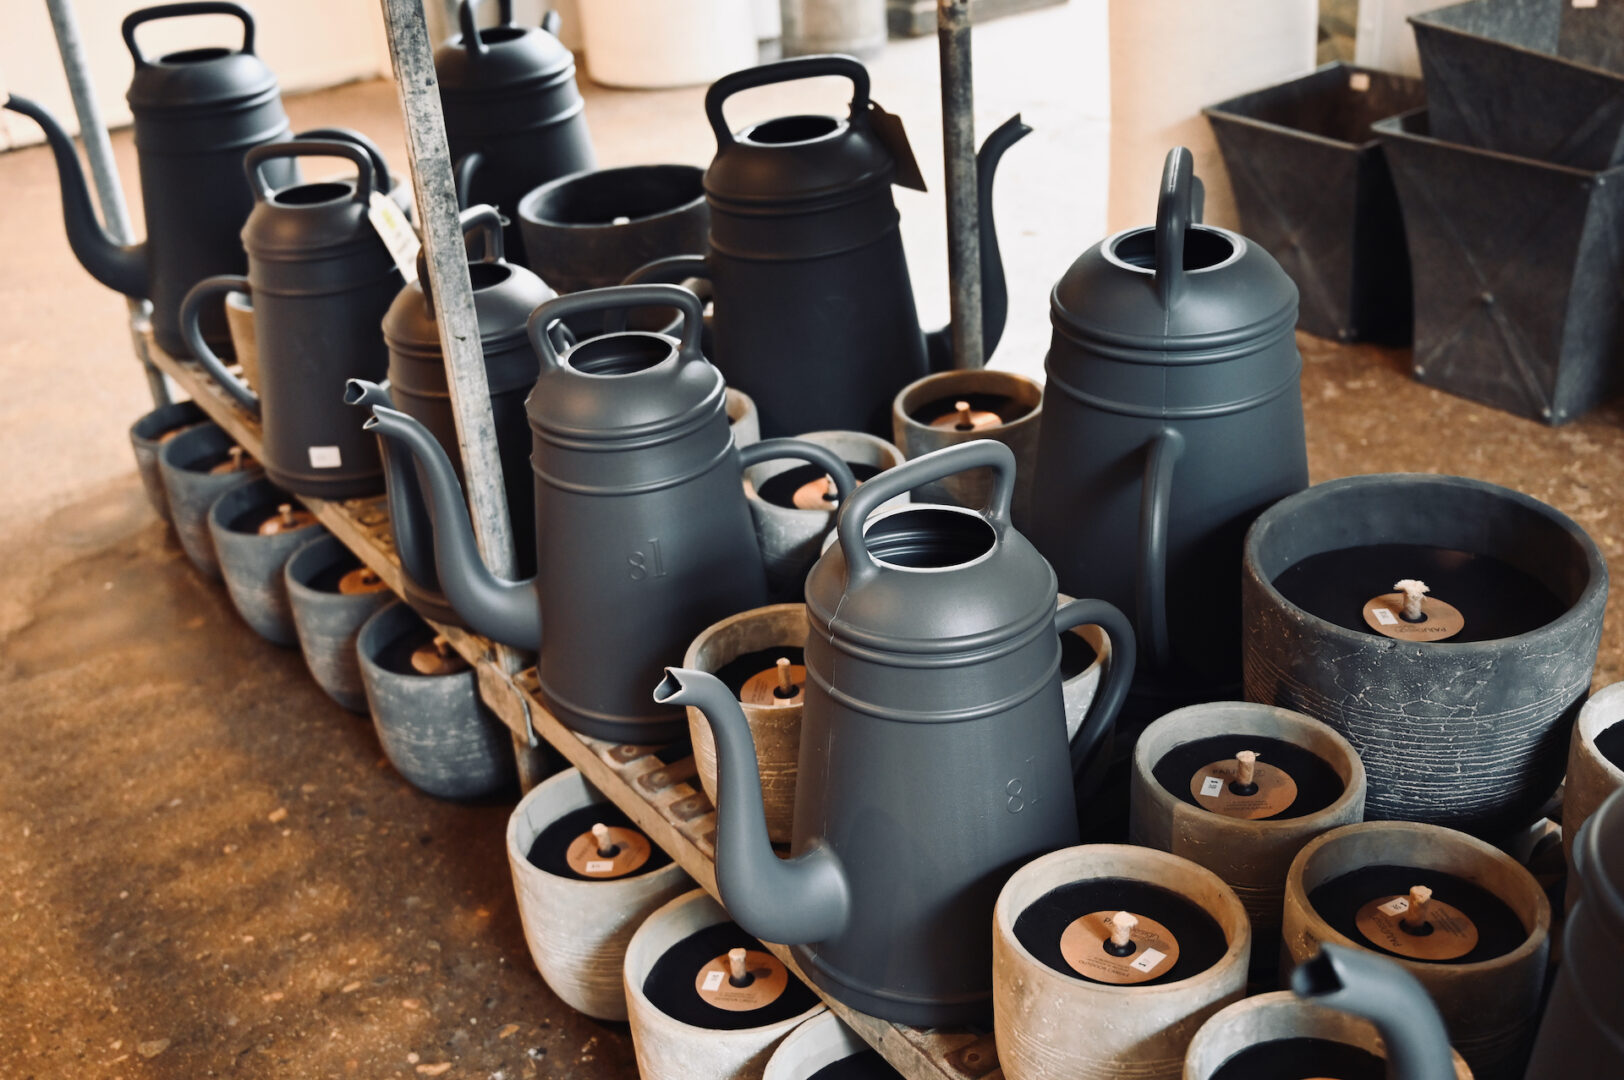 Lungo Watering Cans